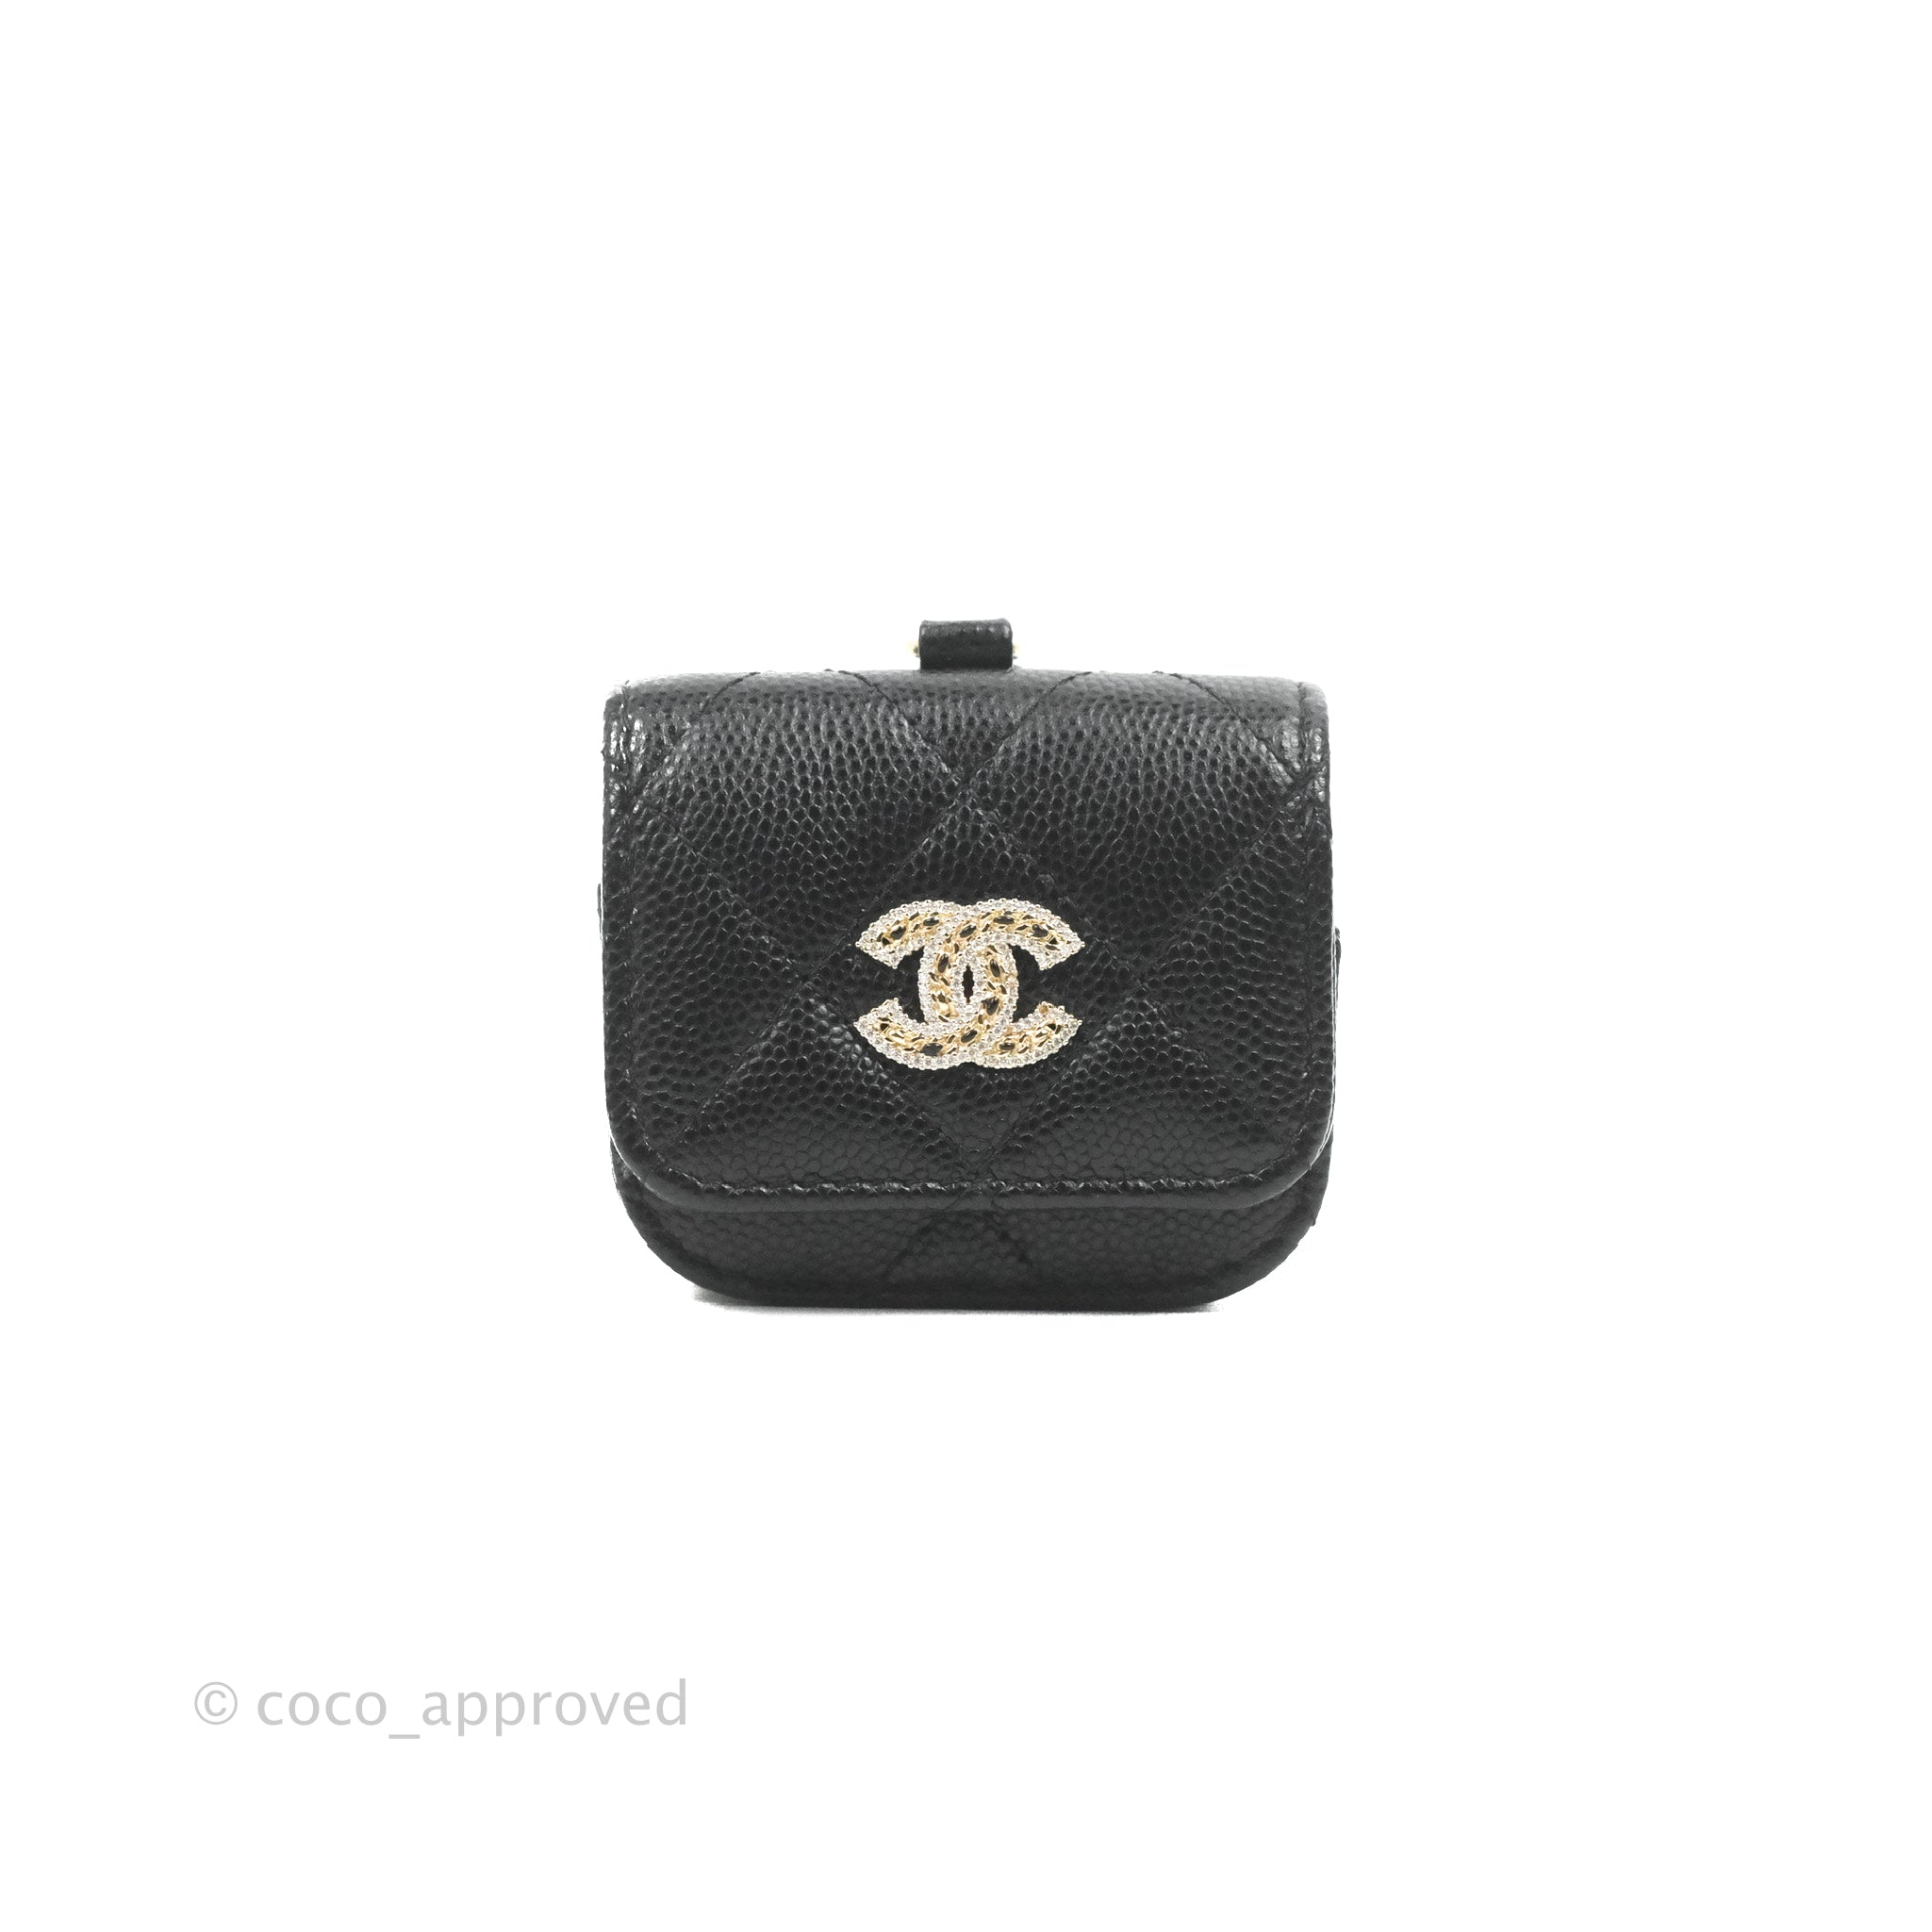 CHANEL CHANEL Matelasse Airpods case Caviar skin leather Black Used Women  CC Coco Product Code2107600871943BRAND OFF Online Store